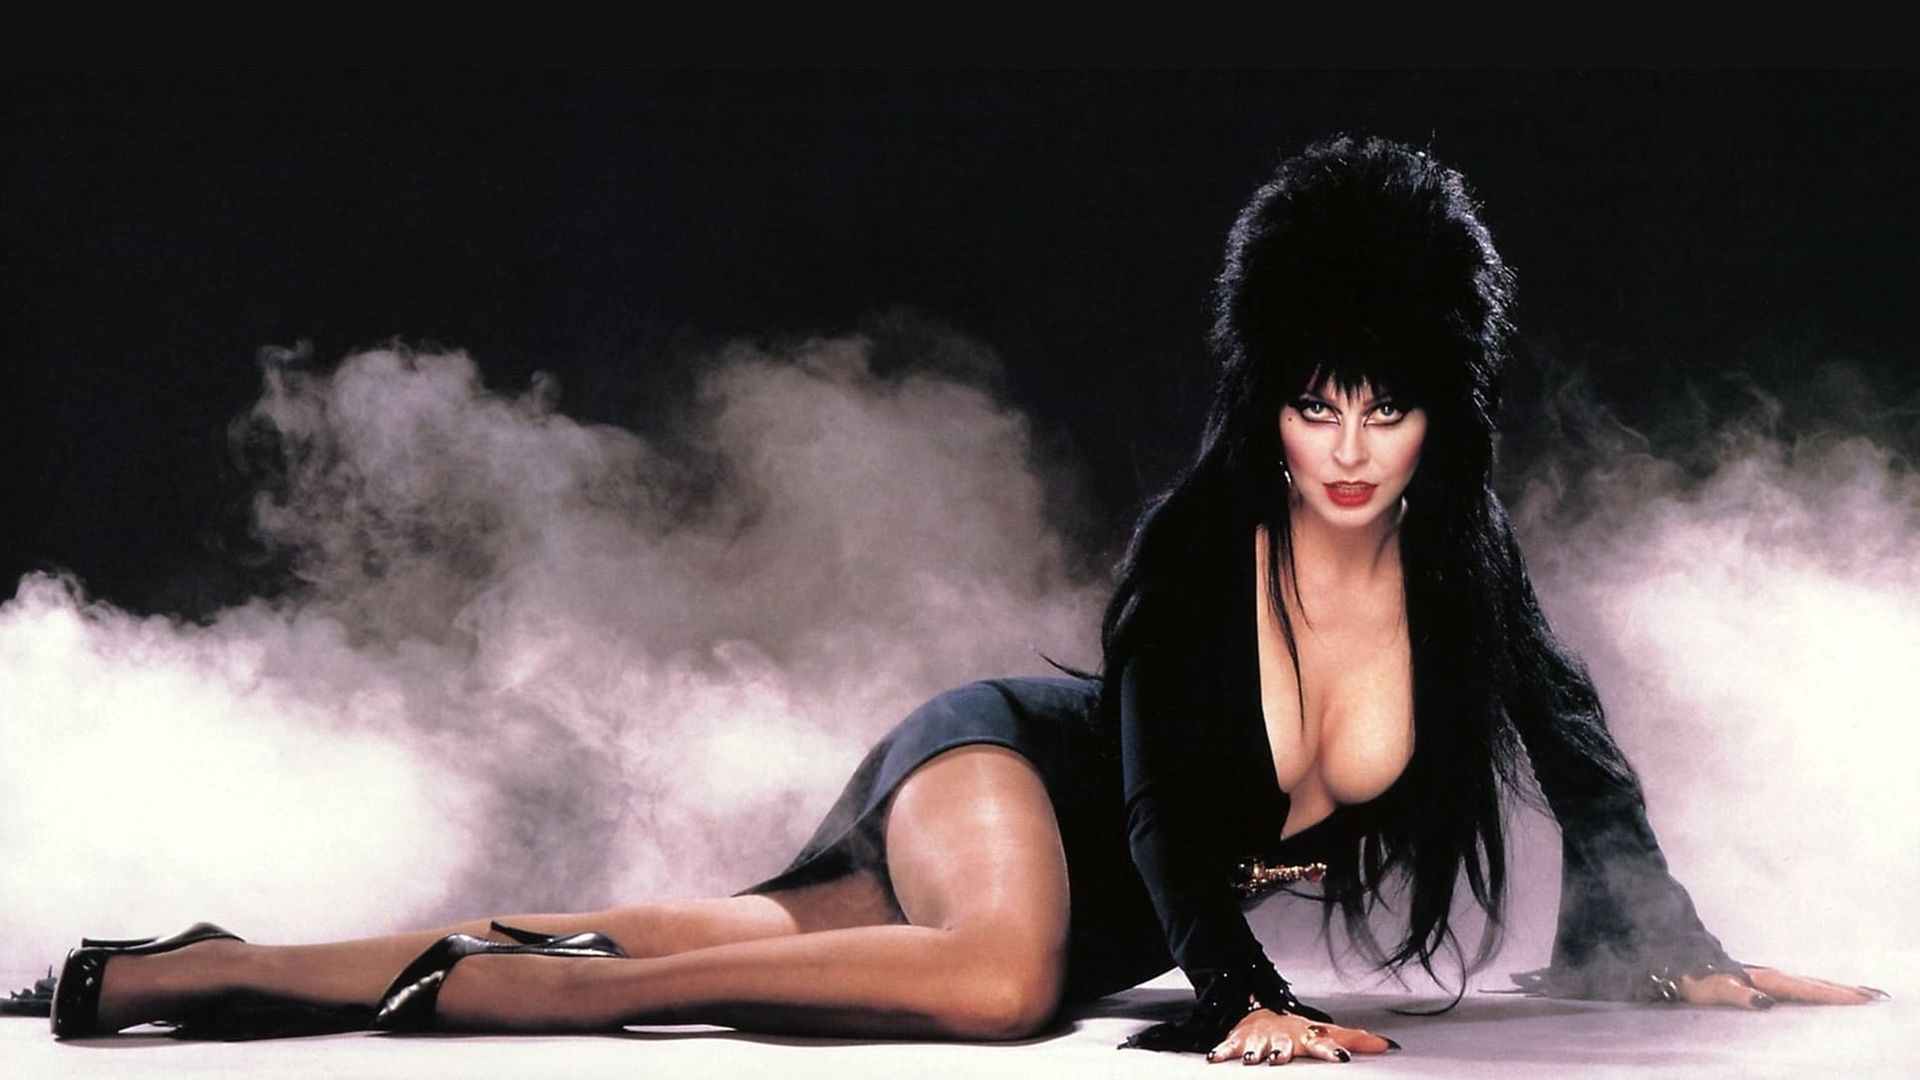 Too Macabre: The Making of Elvira, Mistress of the Dark background